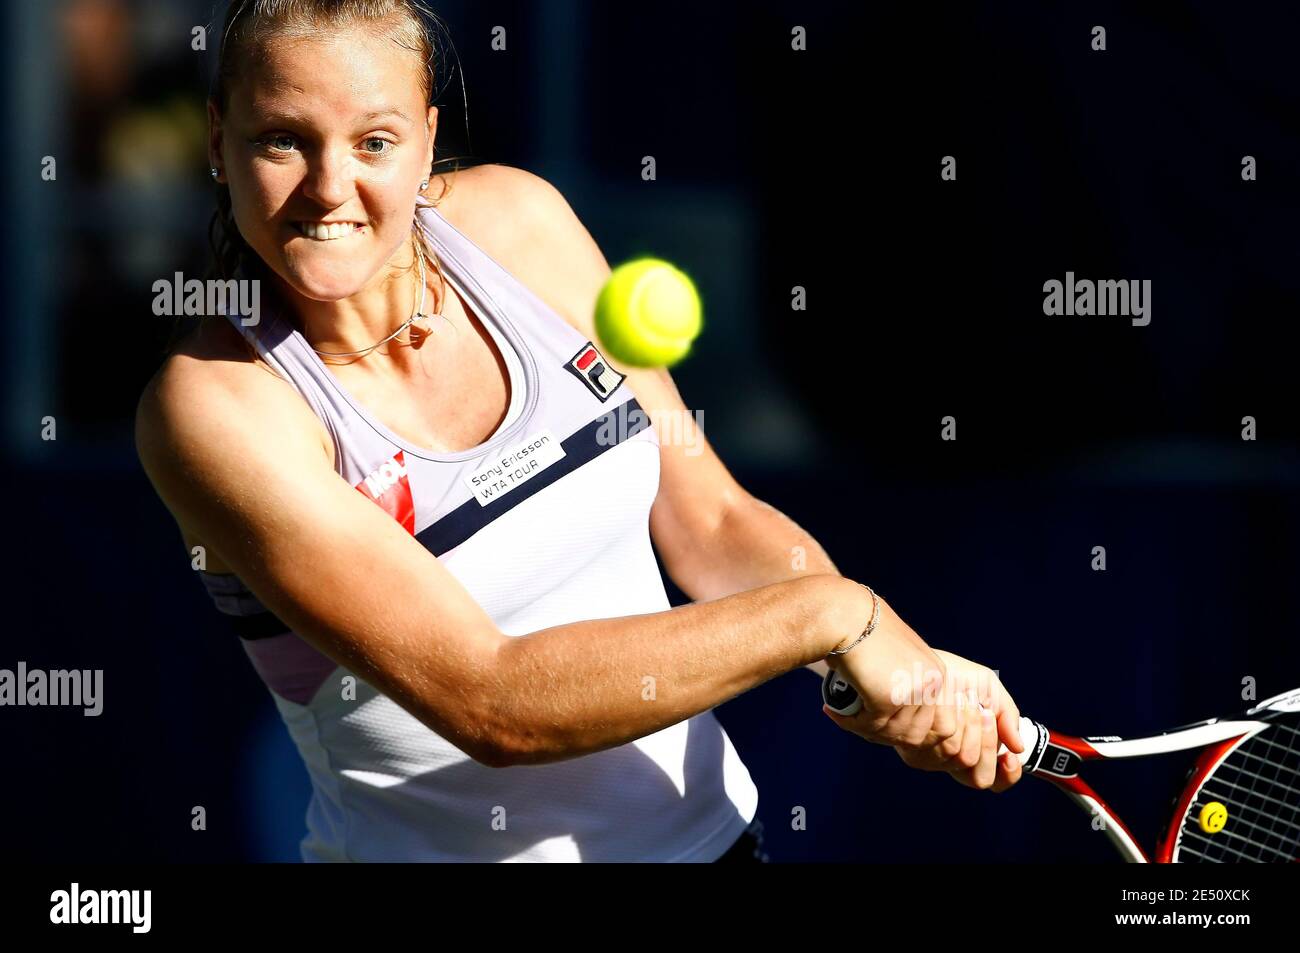 Hungary Agnes Szavay in action during her 2008 Bausch & Lomb Tennis Championships Quarterfinal match against USA's Lindsay Davenport in Amelia Island, FL, USA on April 11. 2008. Davenport defeated Szavay 6-4, 7-6. Photo by Gray Quetti/Cal Sport Media/Cameleon/ABACAPRESS.COM Stock Photo